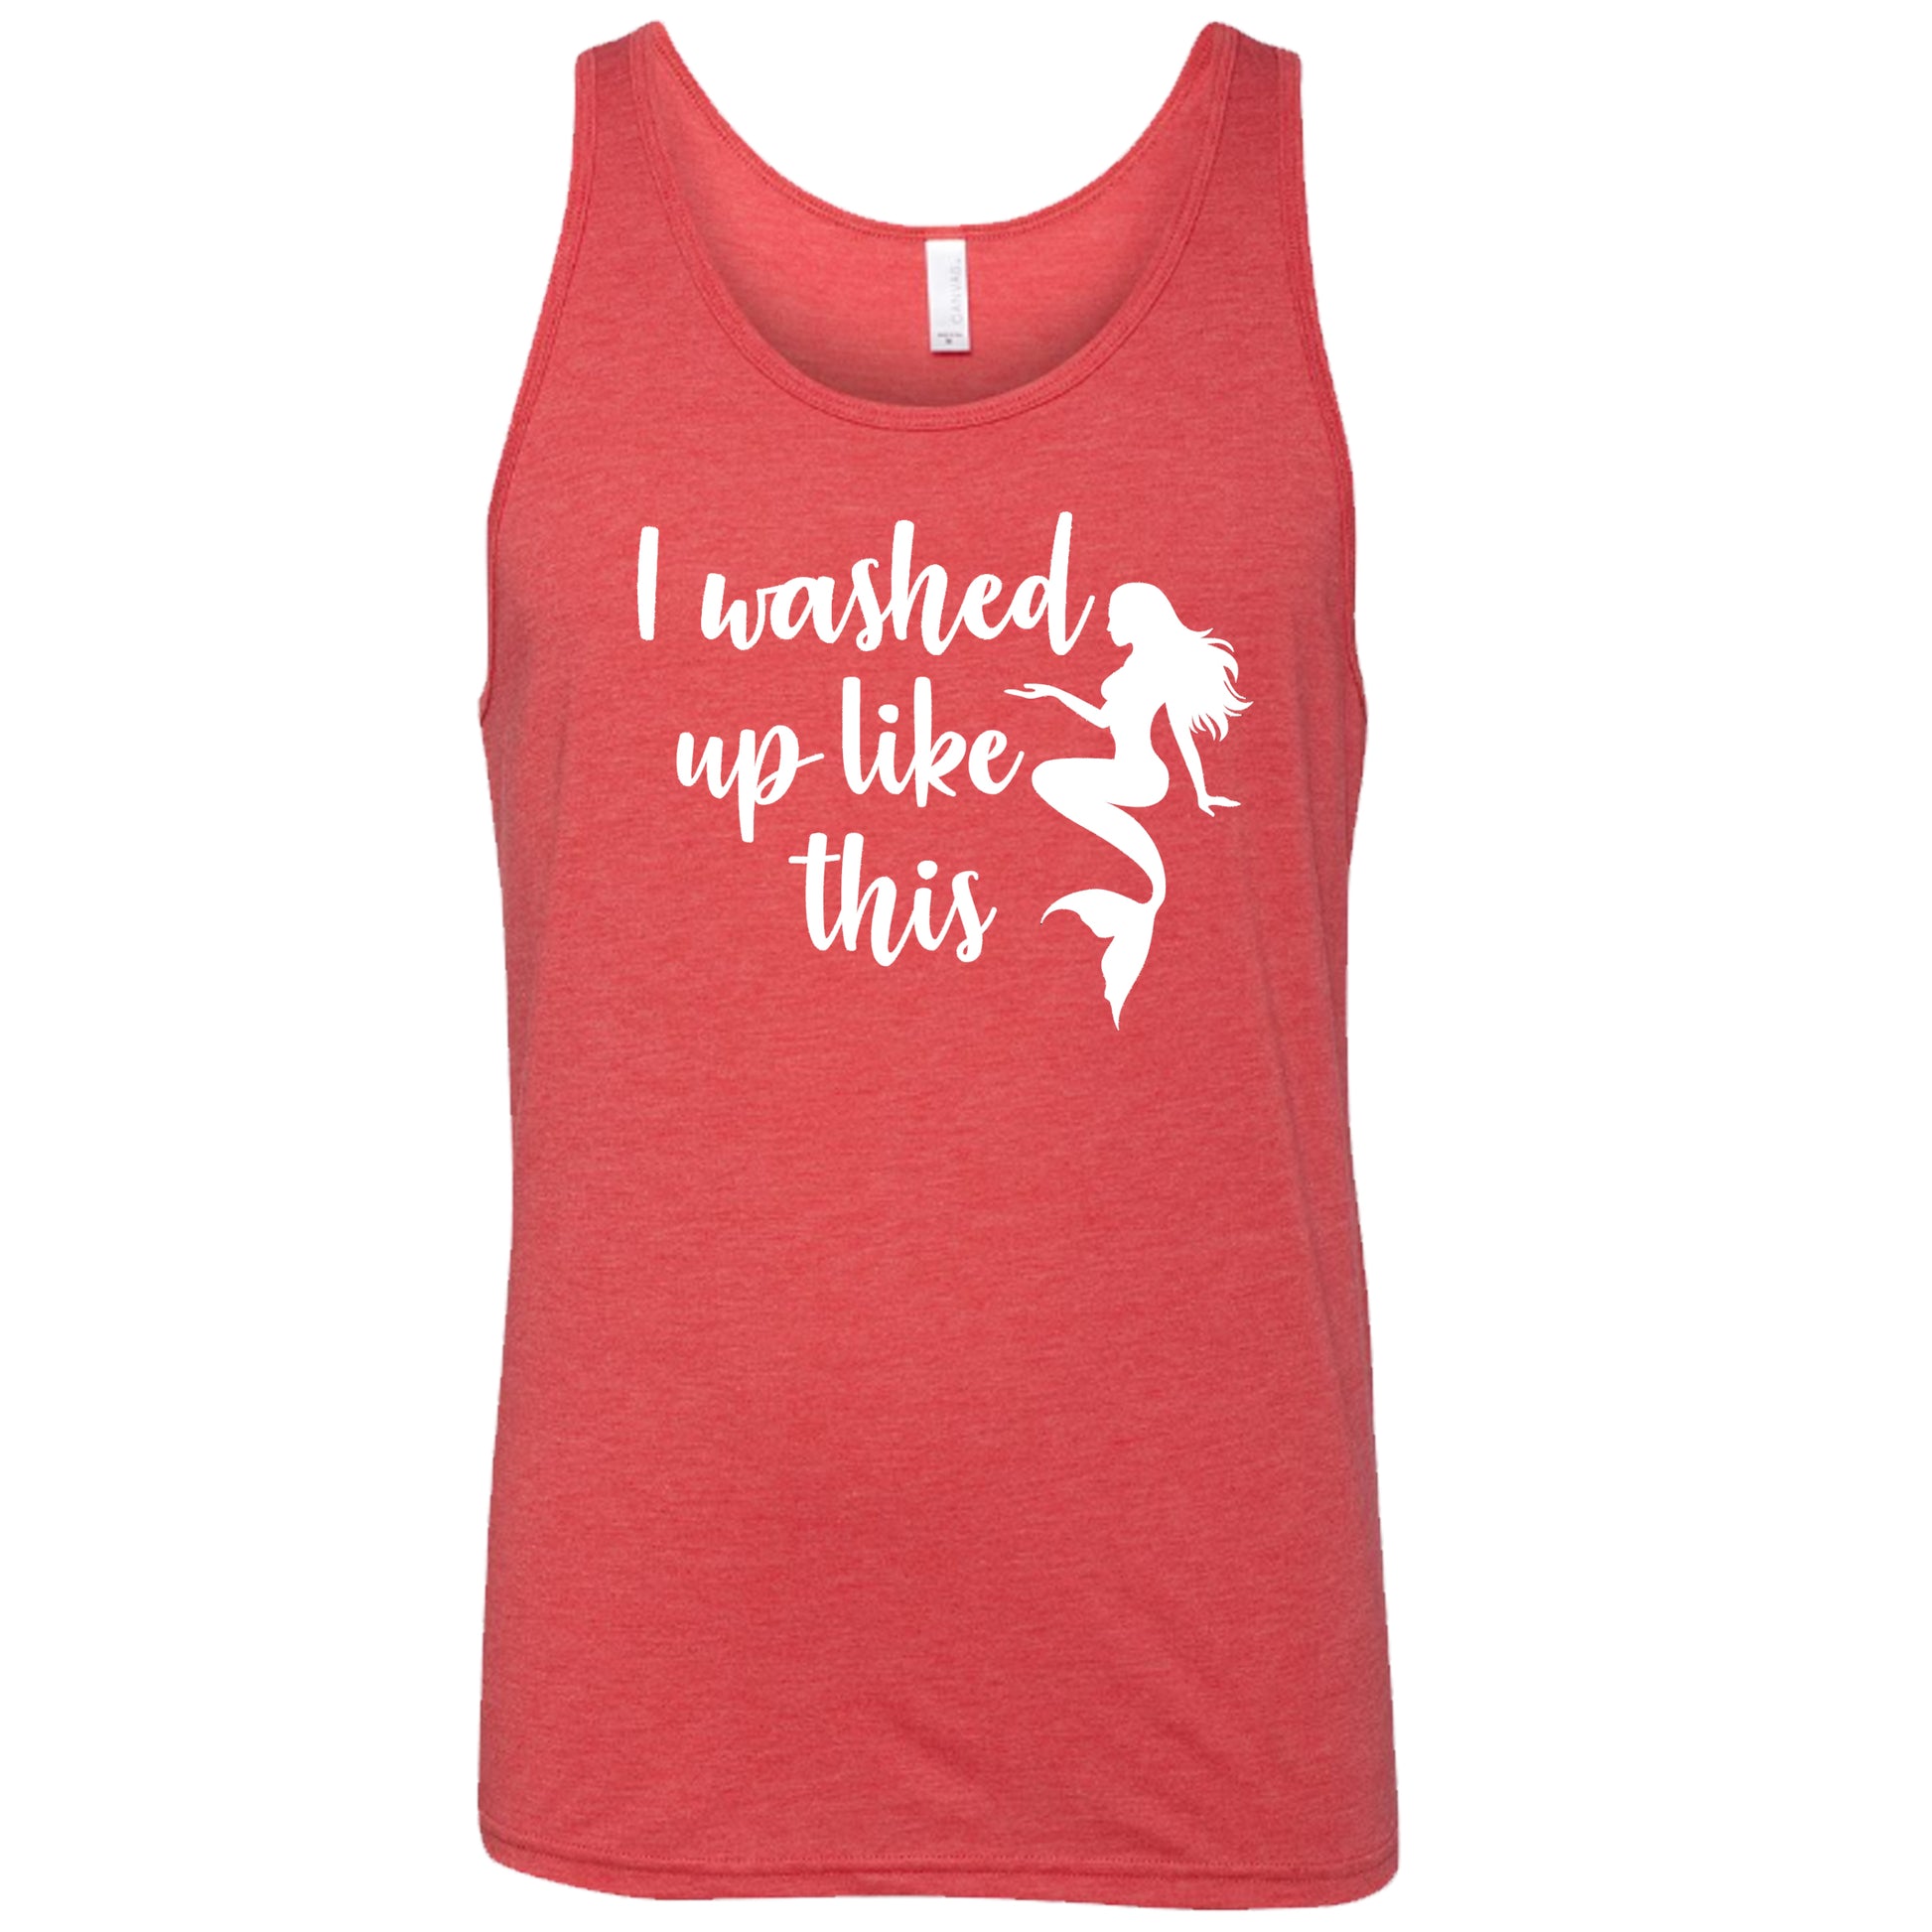 red unisex tank with the saying "i washed up like this" in white in the center